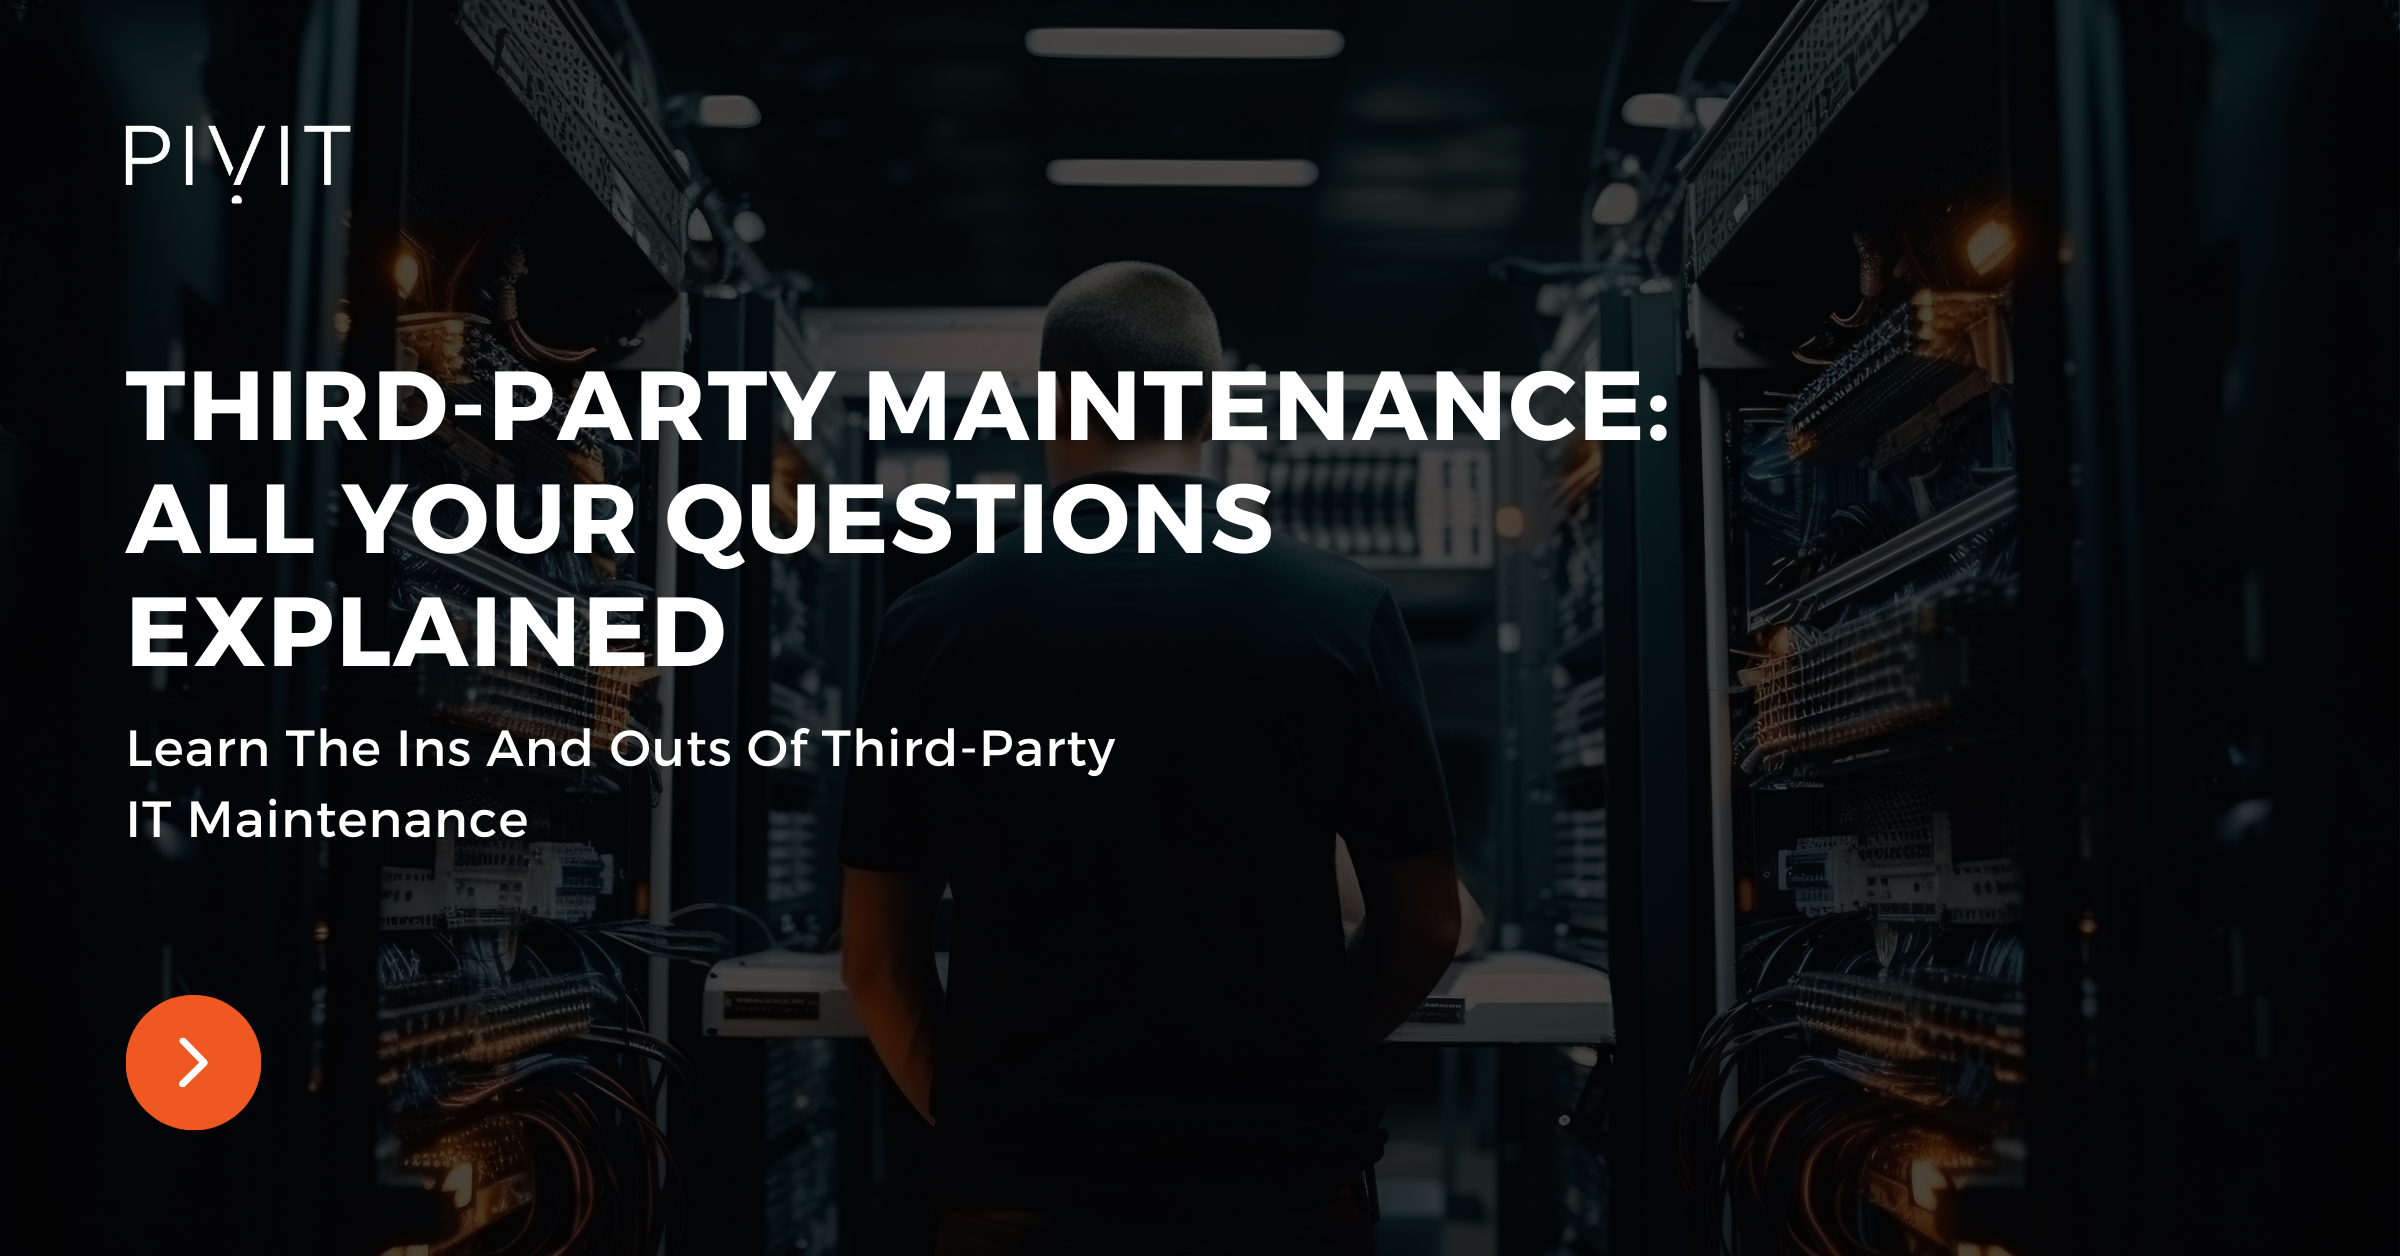 Learn The Ins And Outs Of Third-Party IT Maintenance - Third-Party Maintenance: All Your Questions Explained